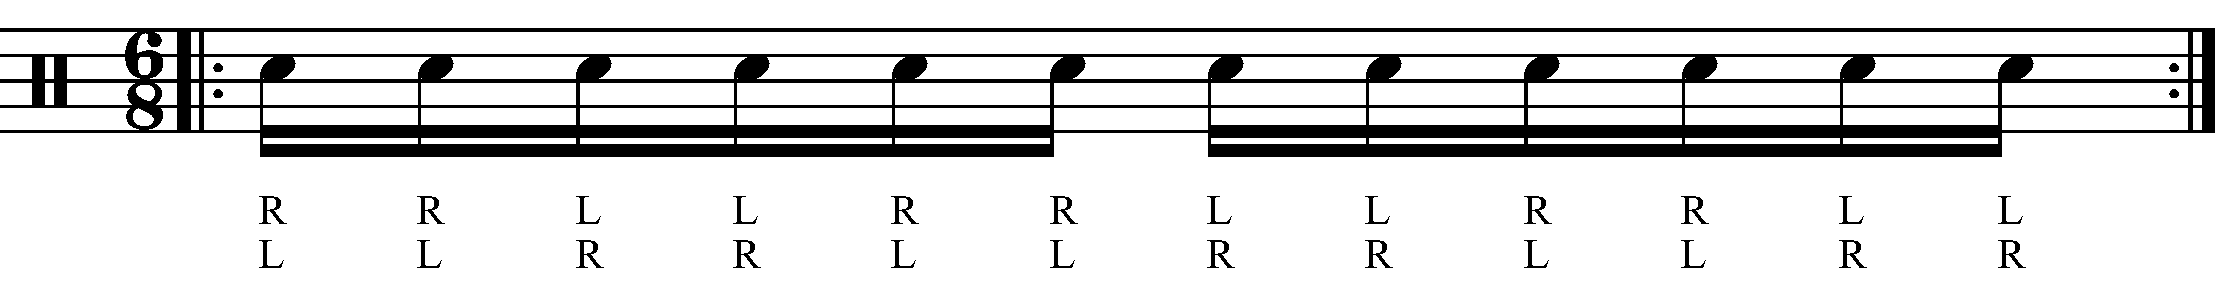 A double stroke triplet in 6/8 as sixteenth notes